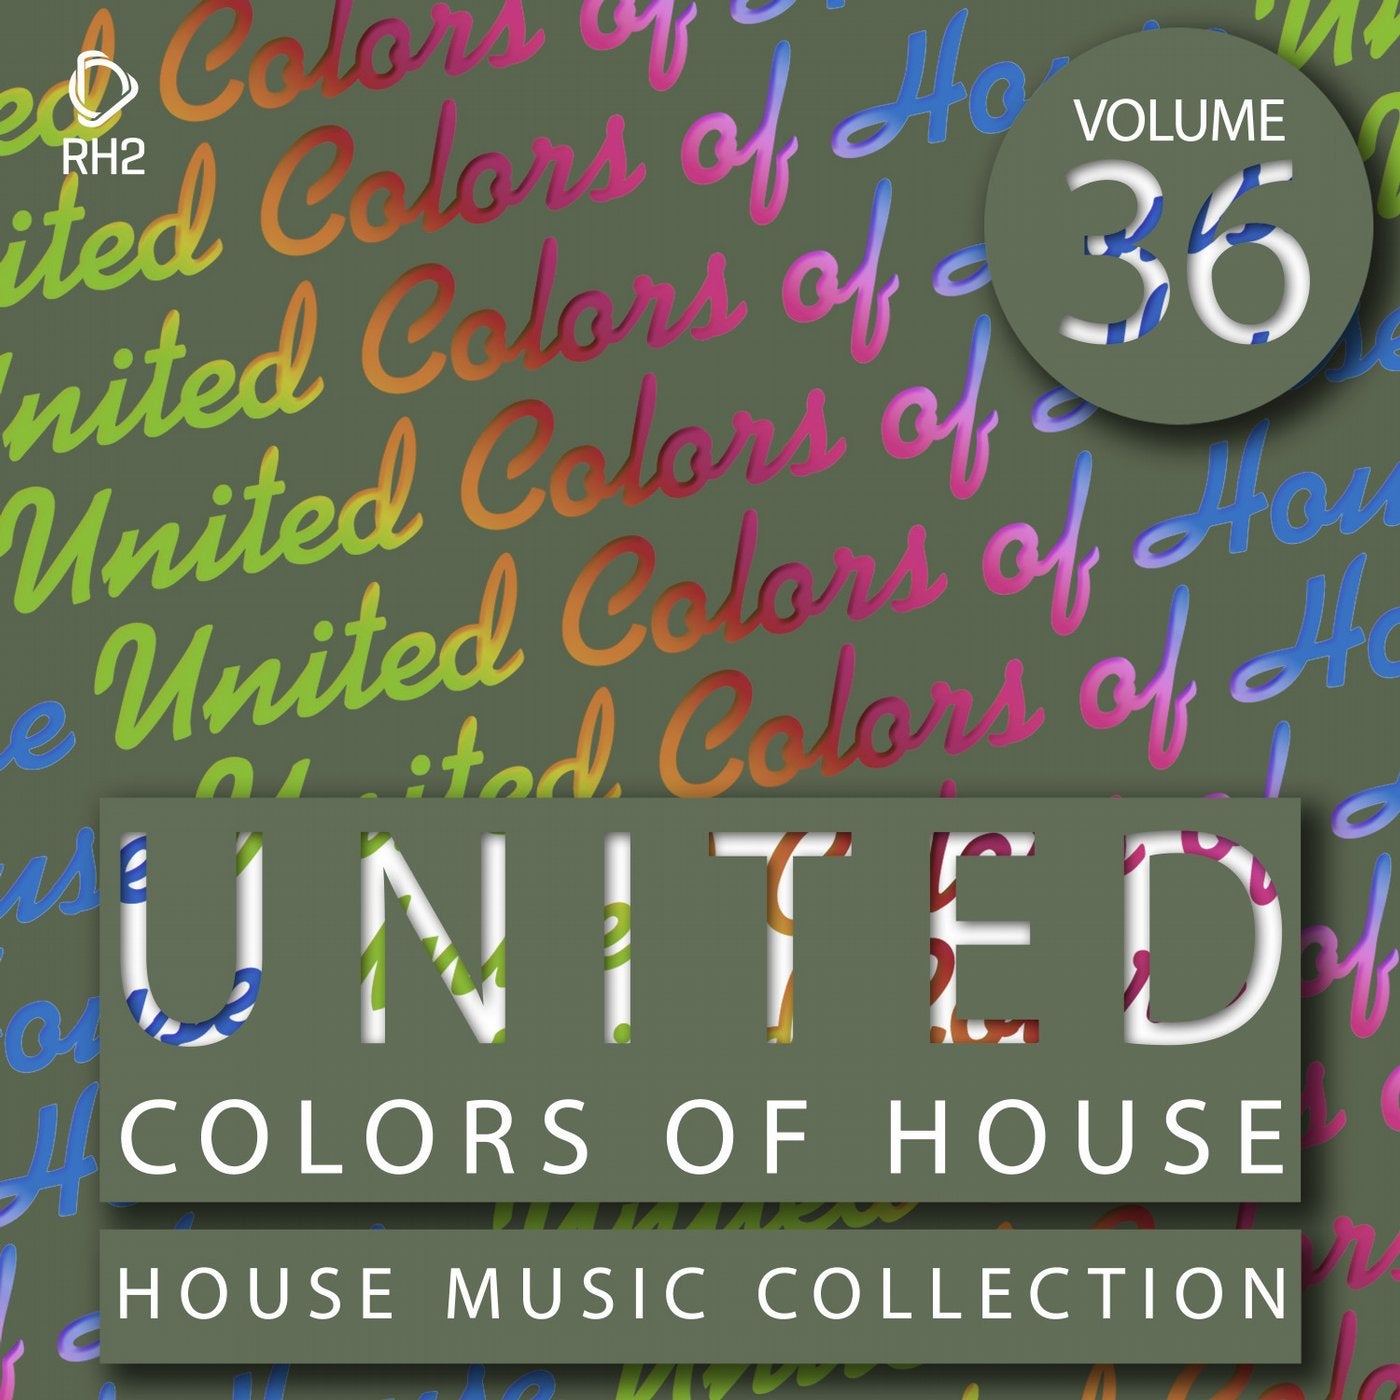 United Colors Of House Vol. 36